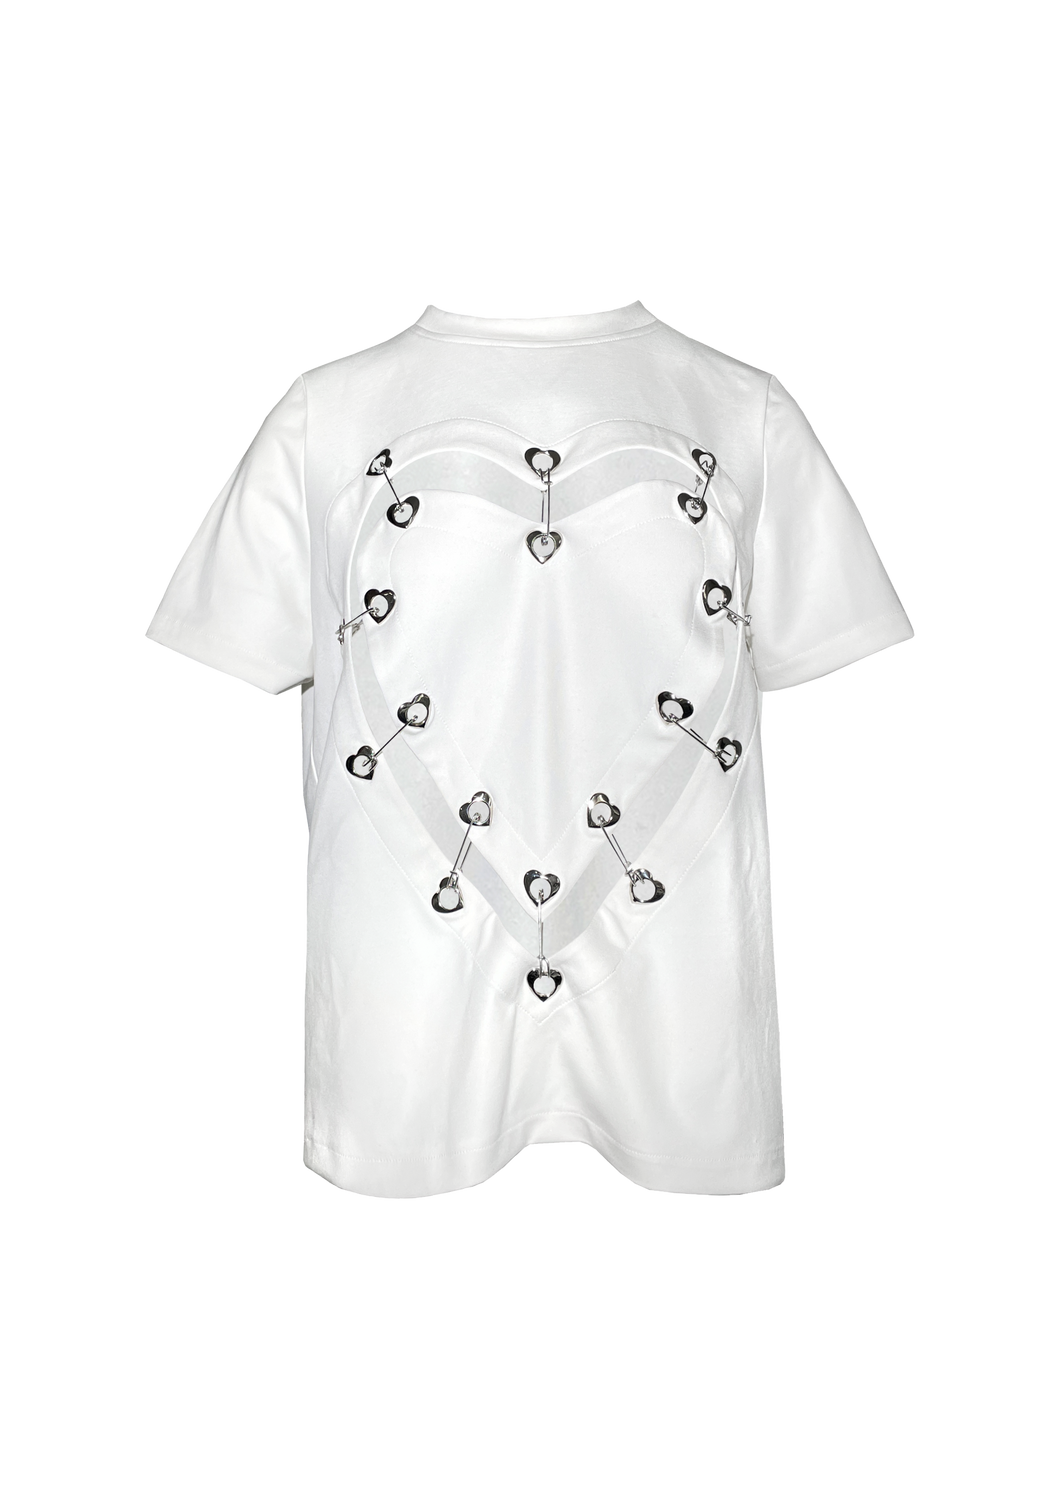 SAFETY PINS HEART SHAPE T-SHIRT (WHITE)